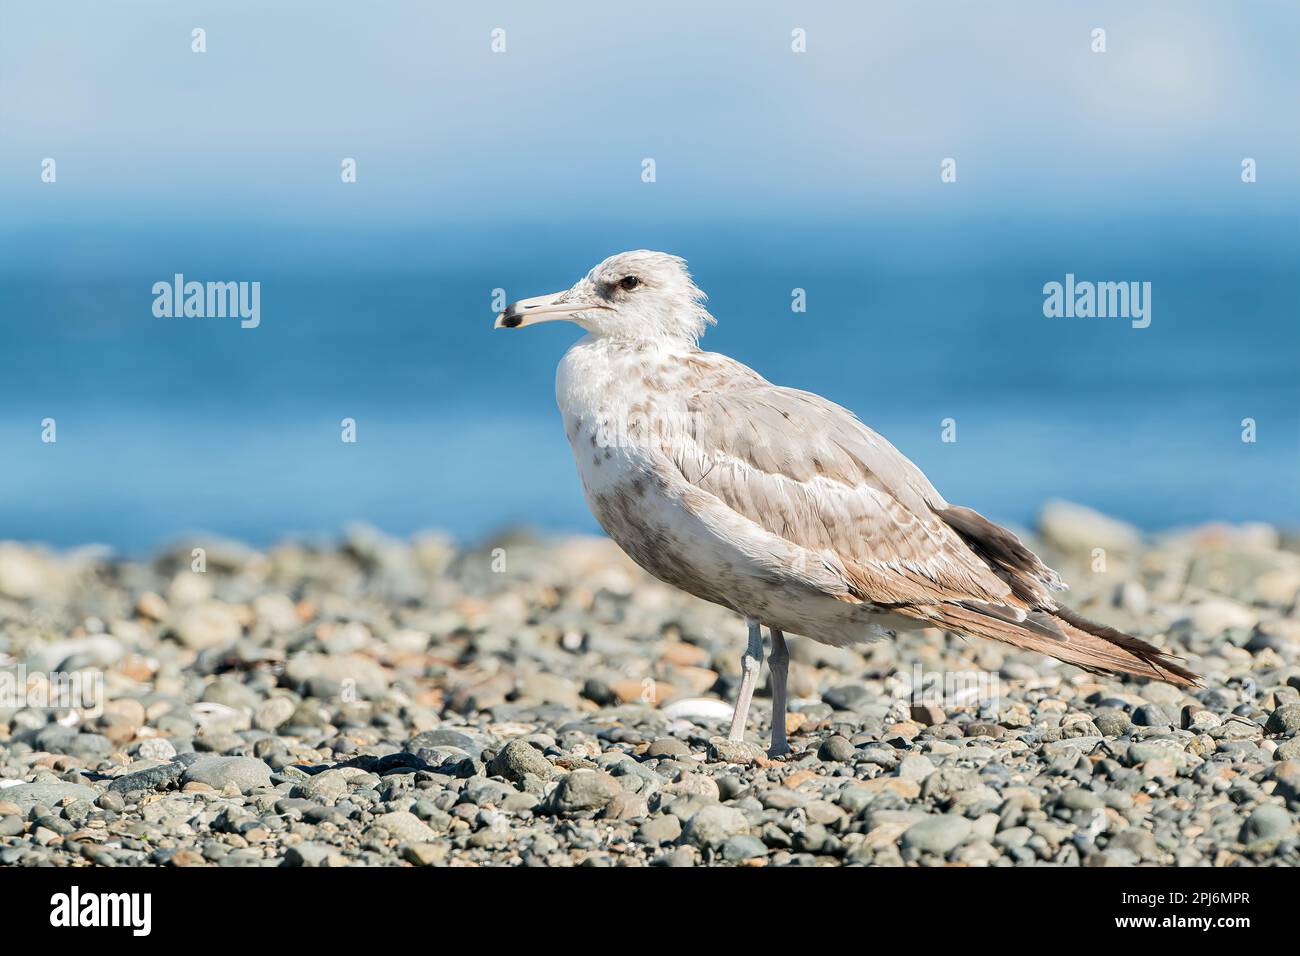 glaucous-winged gull, Larus glaucescens, a single juvenile bird perched on a pebble beach, Vancouver, Canada Stock Photo